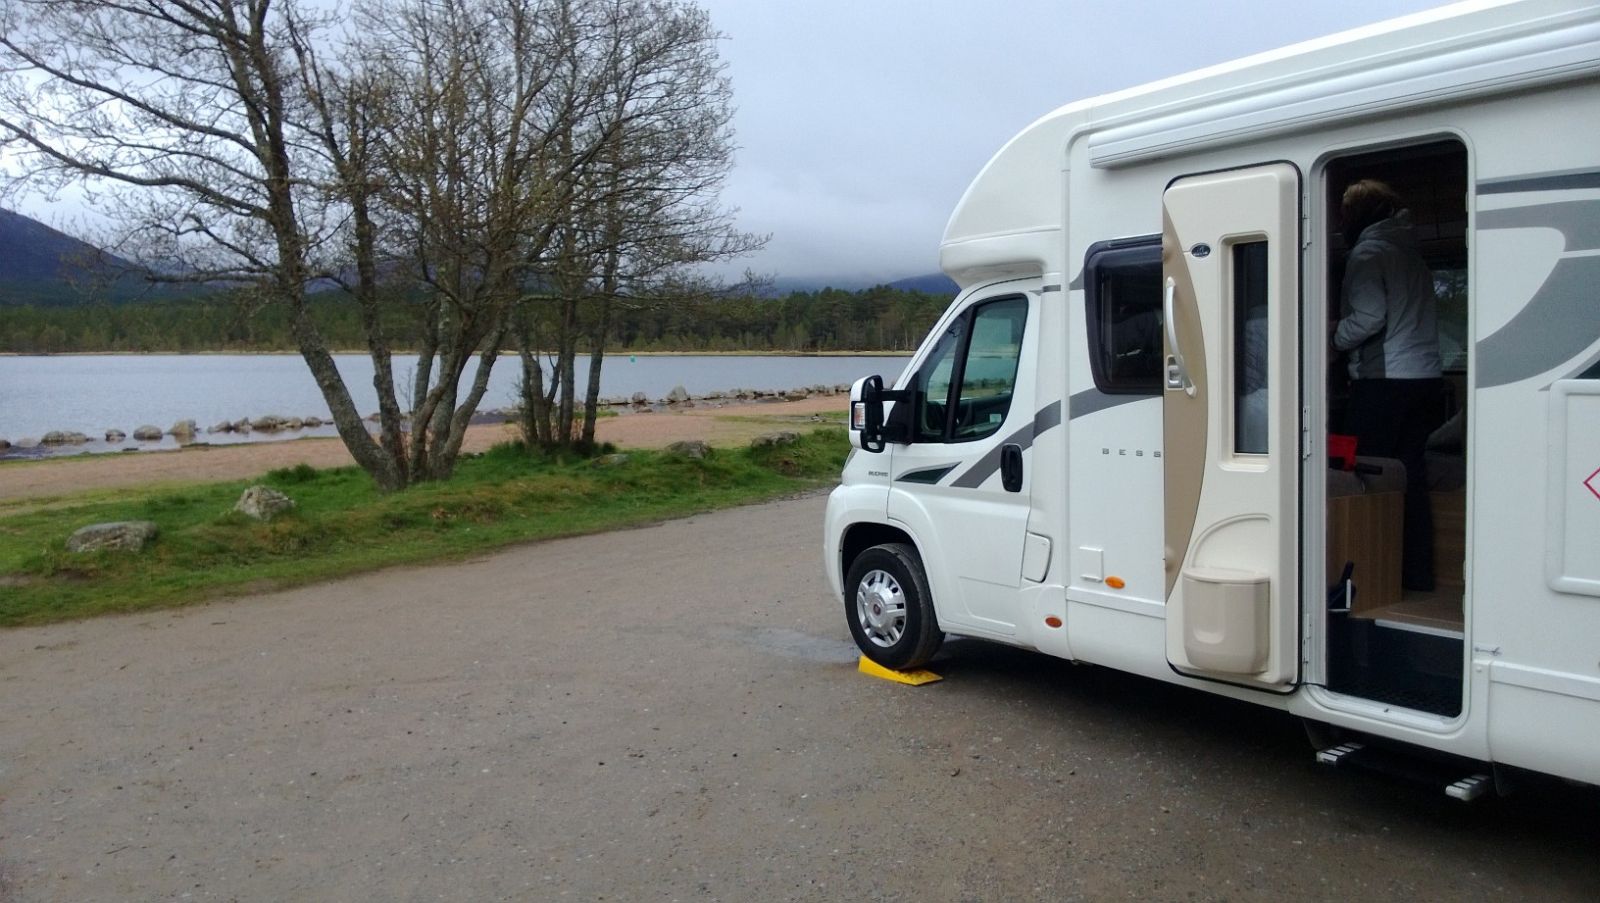 Motorhome parked by banks of loch